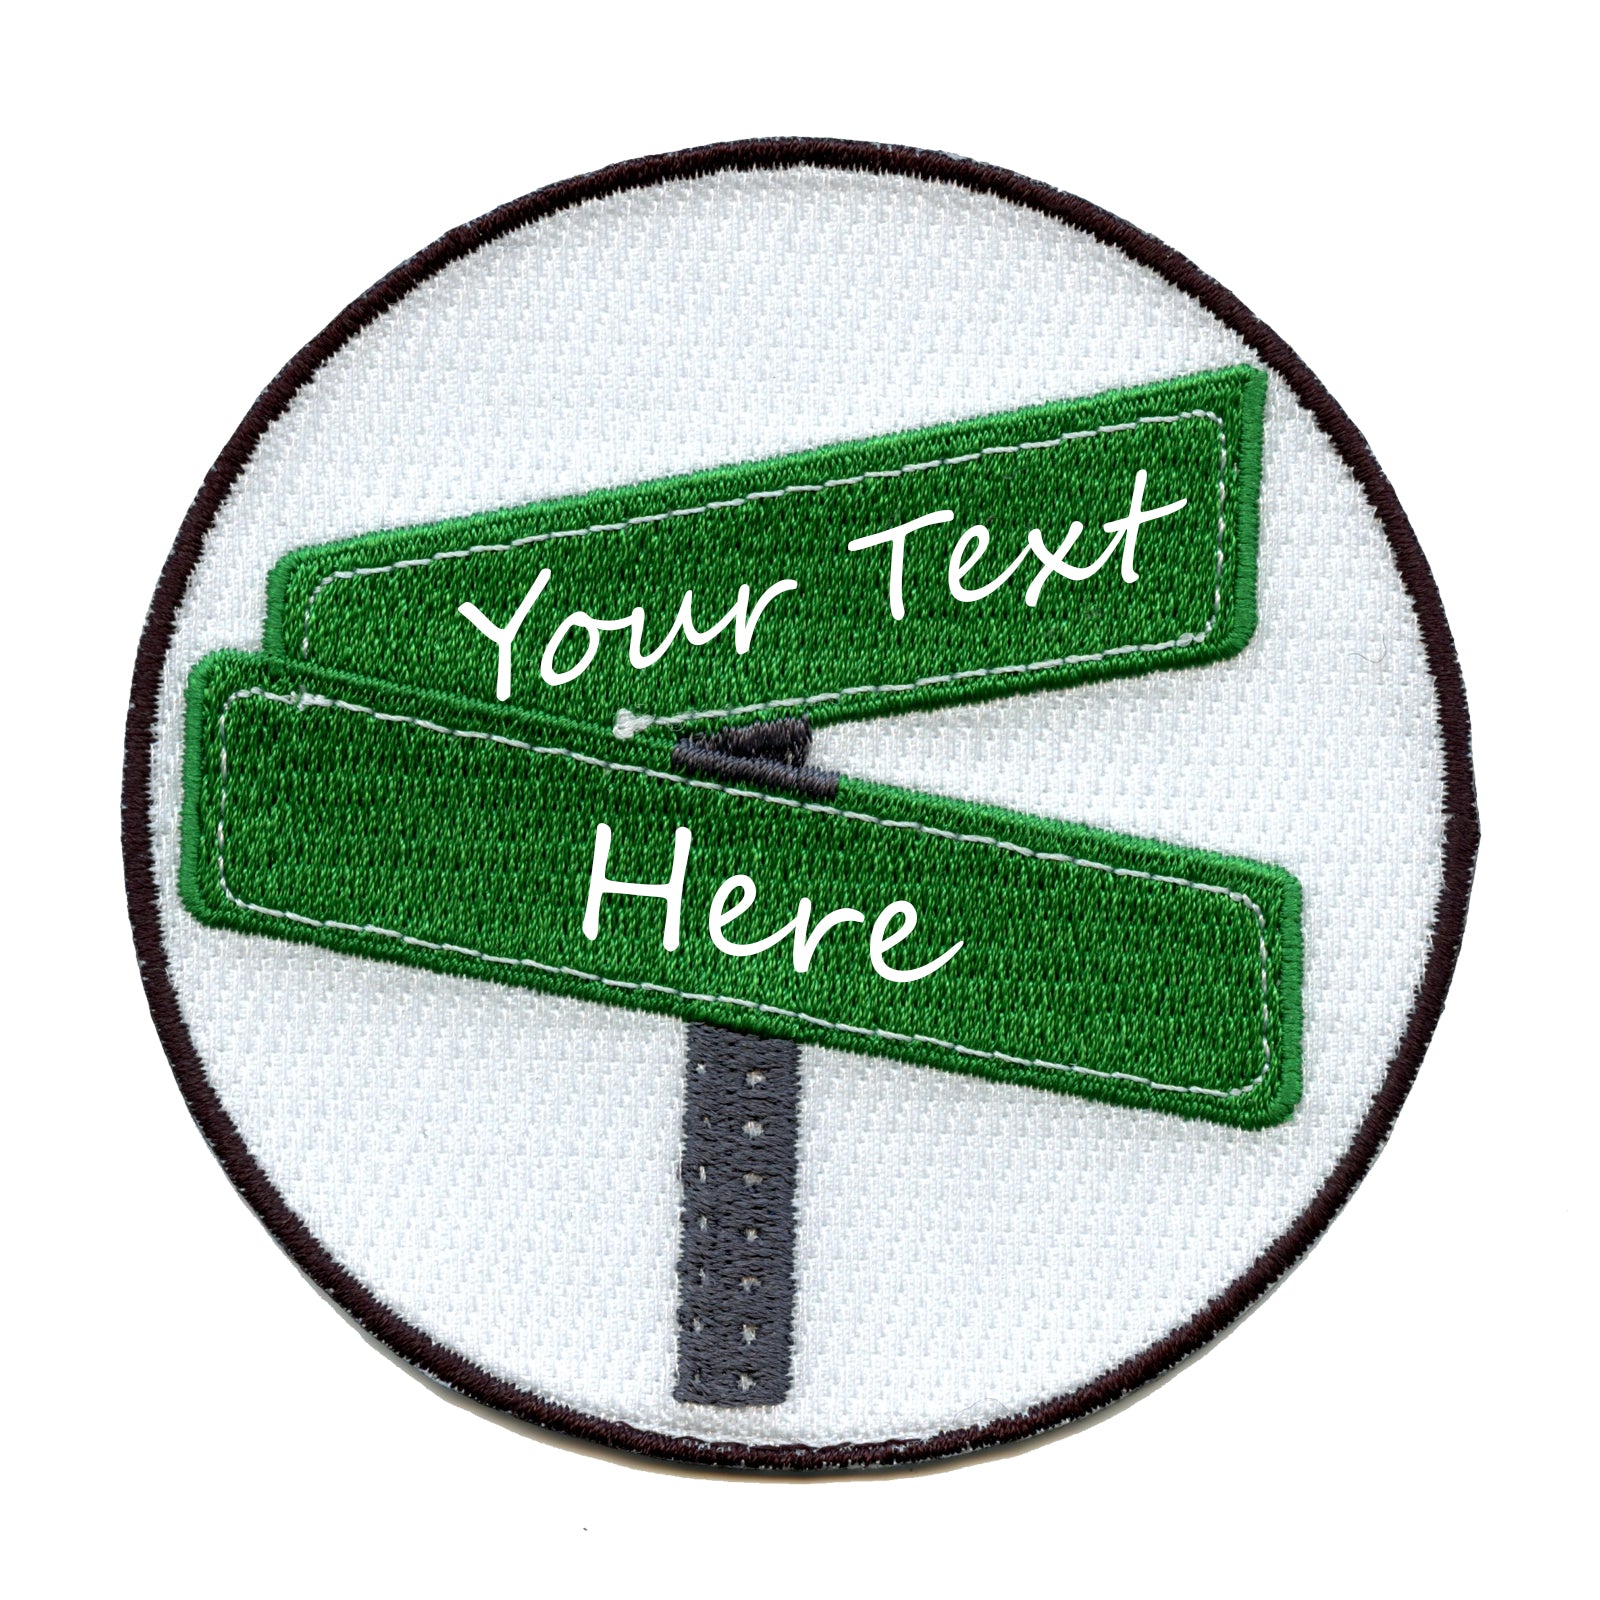 Personalized Customizable Crossing Street Signs Embroidered Iron On Patch 